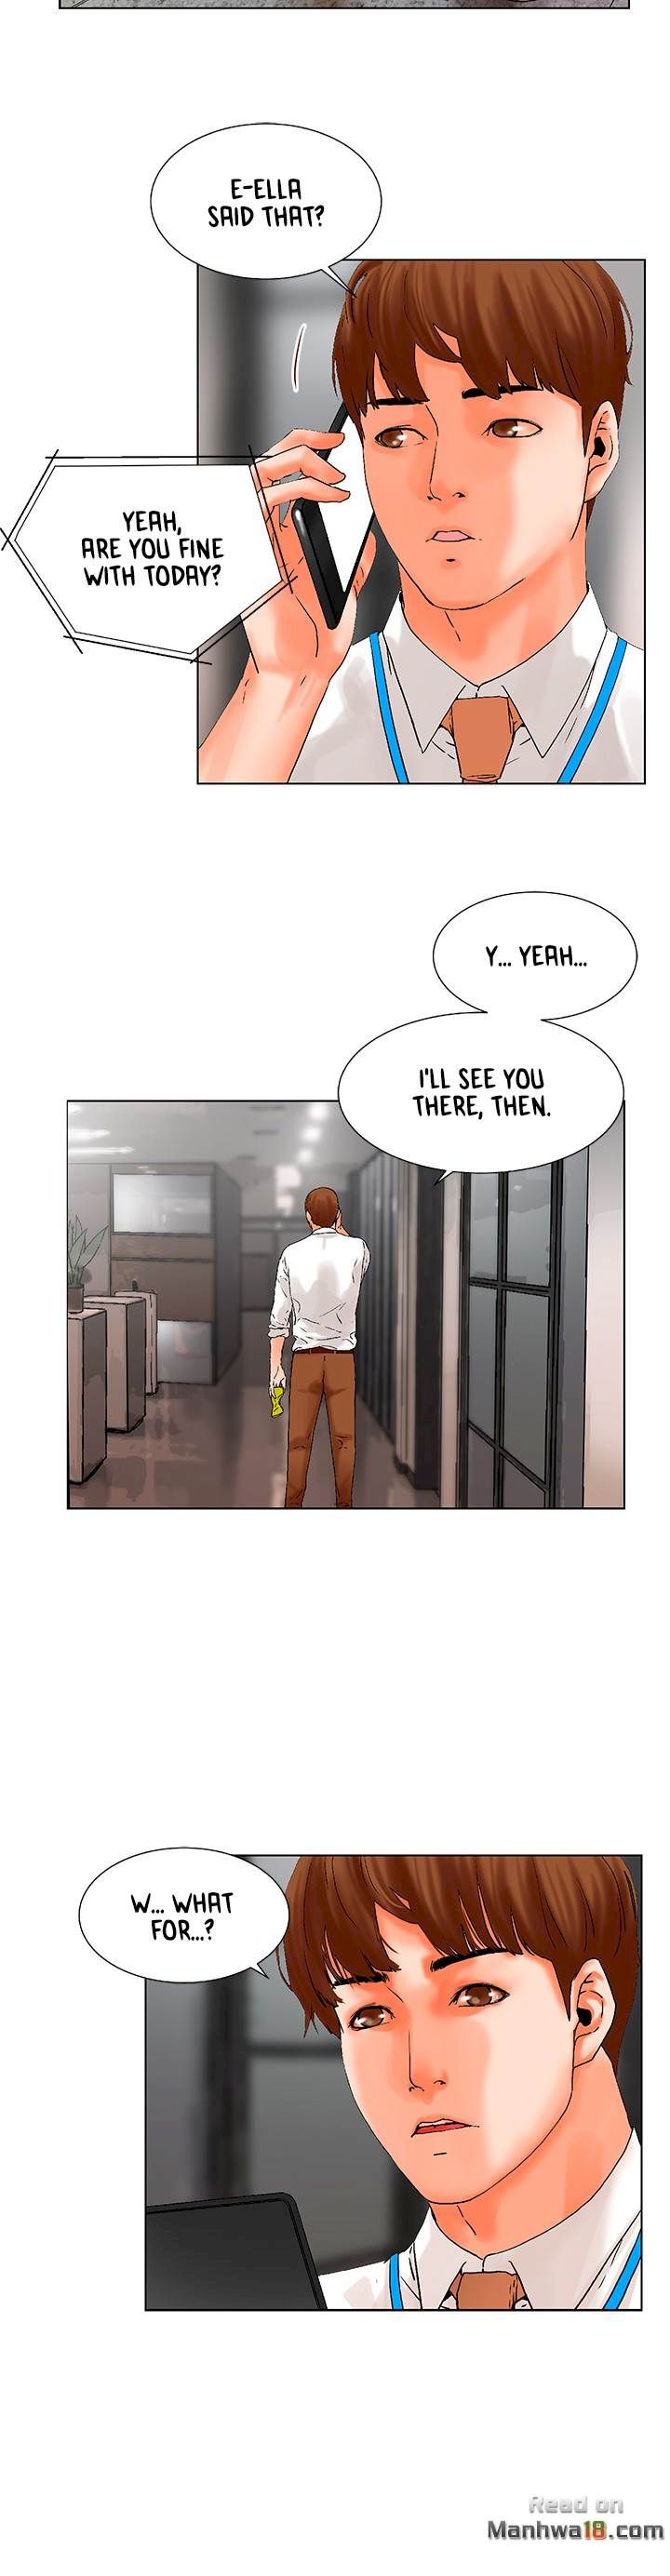 You Me Her - Chapter 16 Page 11